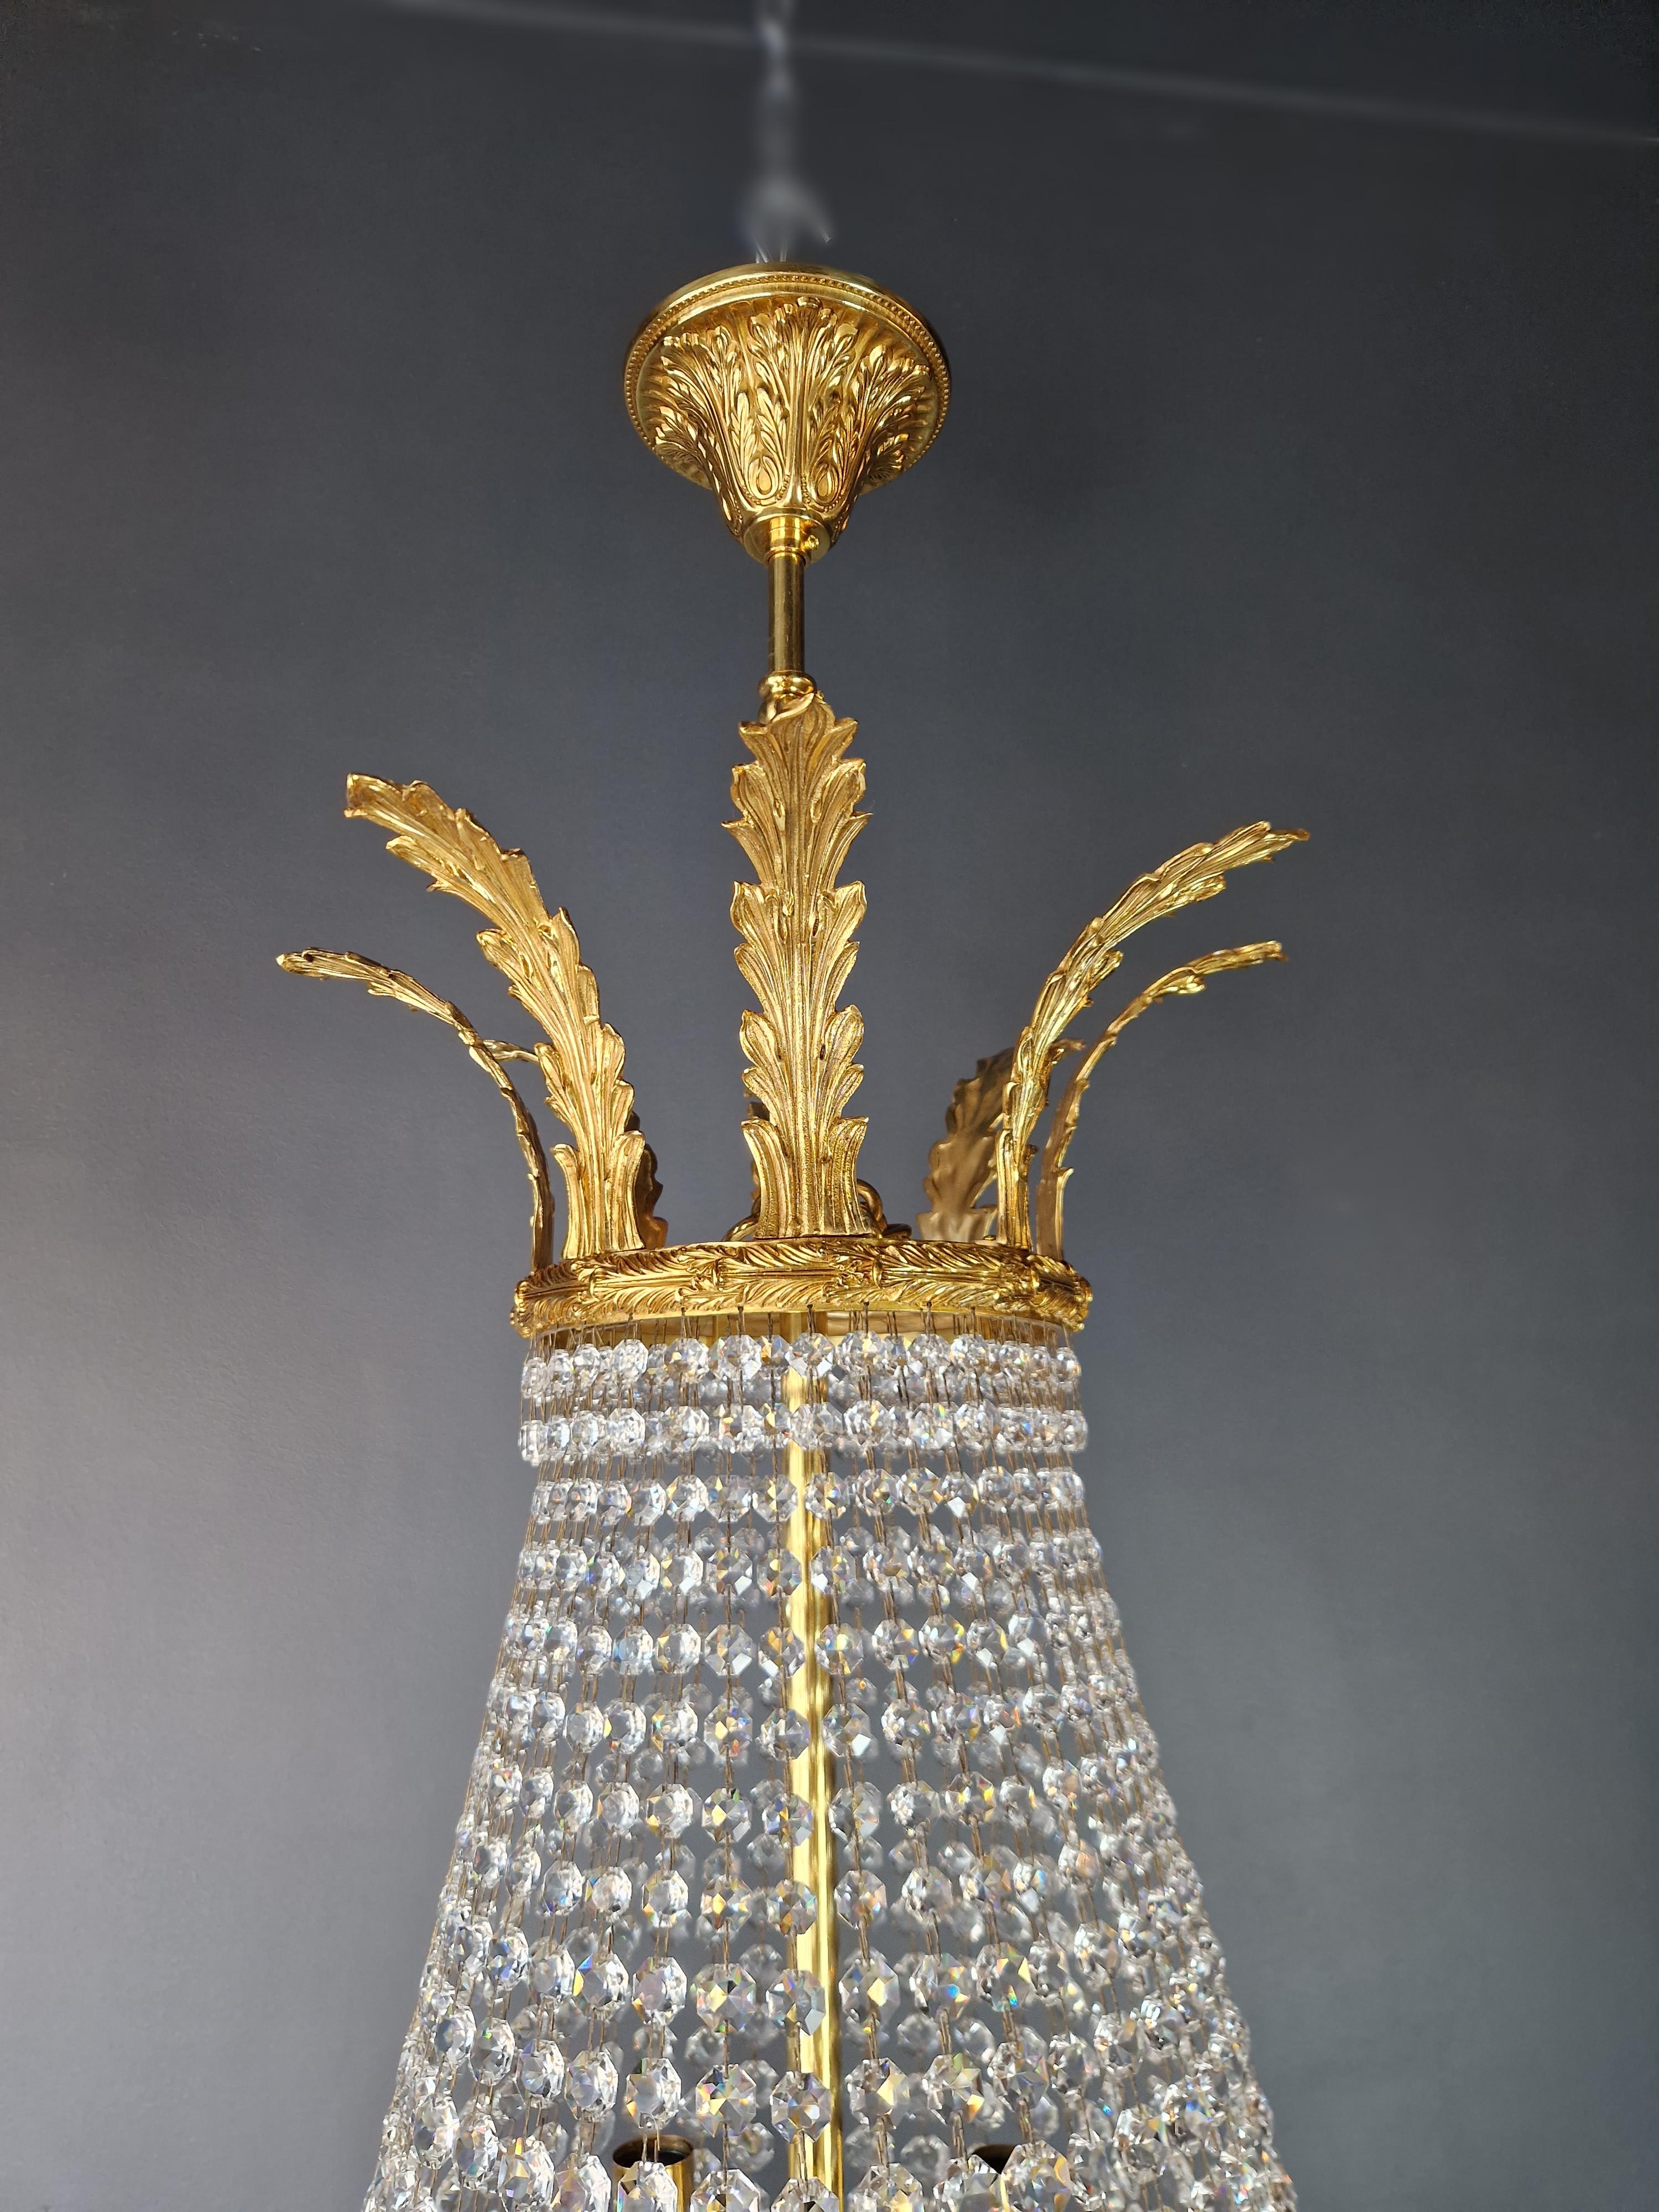 Brass Basket Empire Sac a Pearl Chandelier Crystal Lustre Lamp Antique Gold For Sale 5